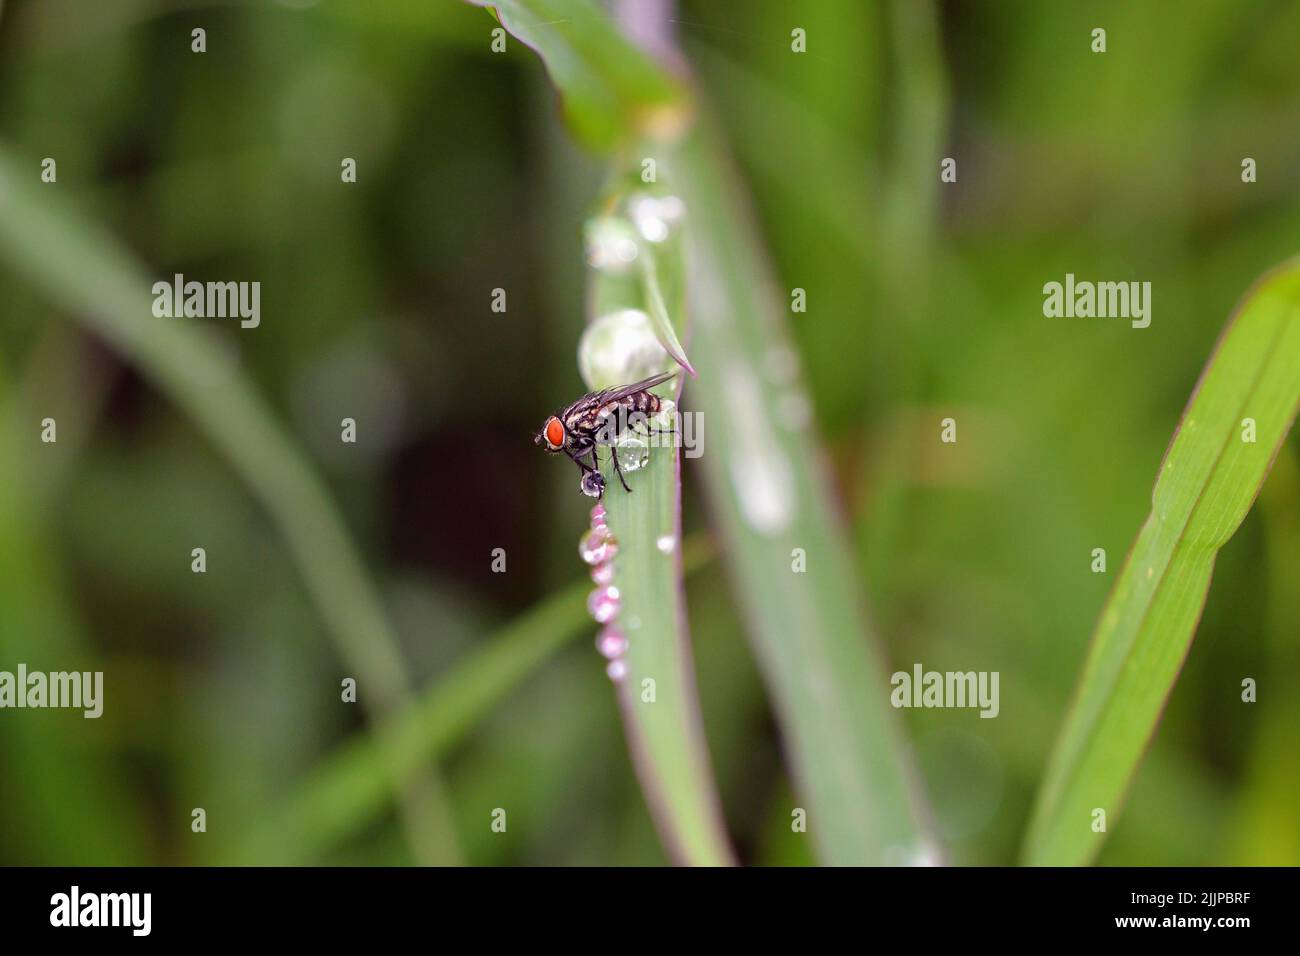 A macro focus shot of a housefly drinking from the water drops on green leaved plant during daytime Stock Photo